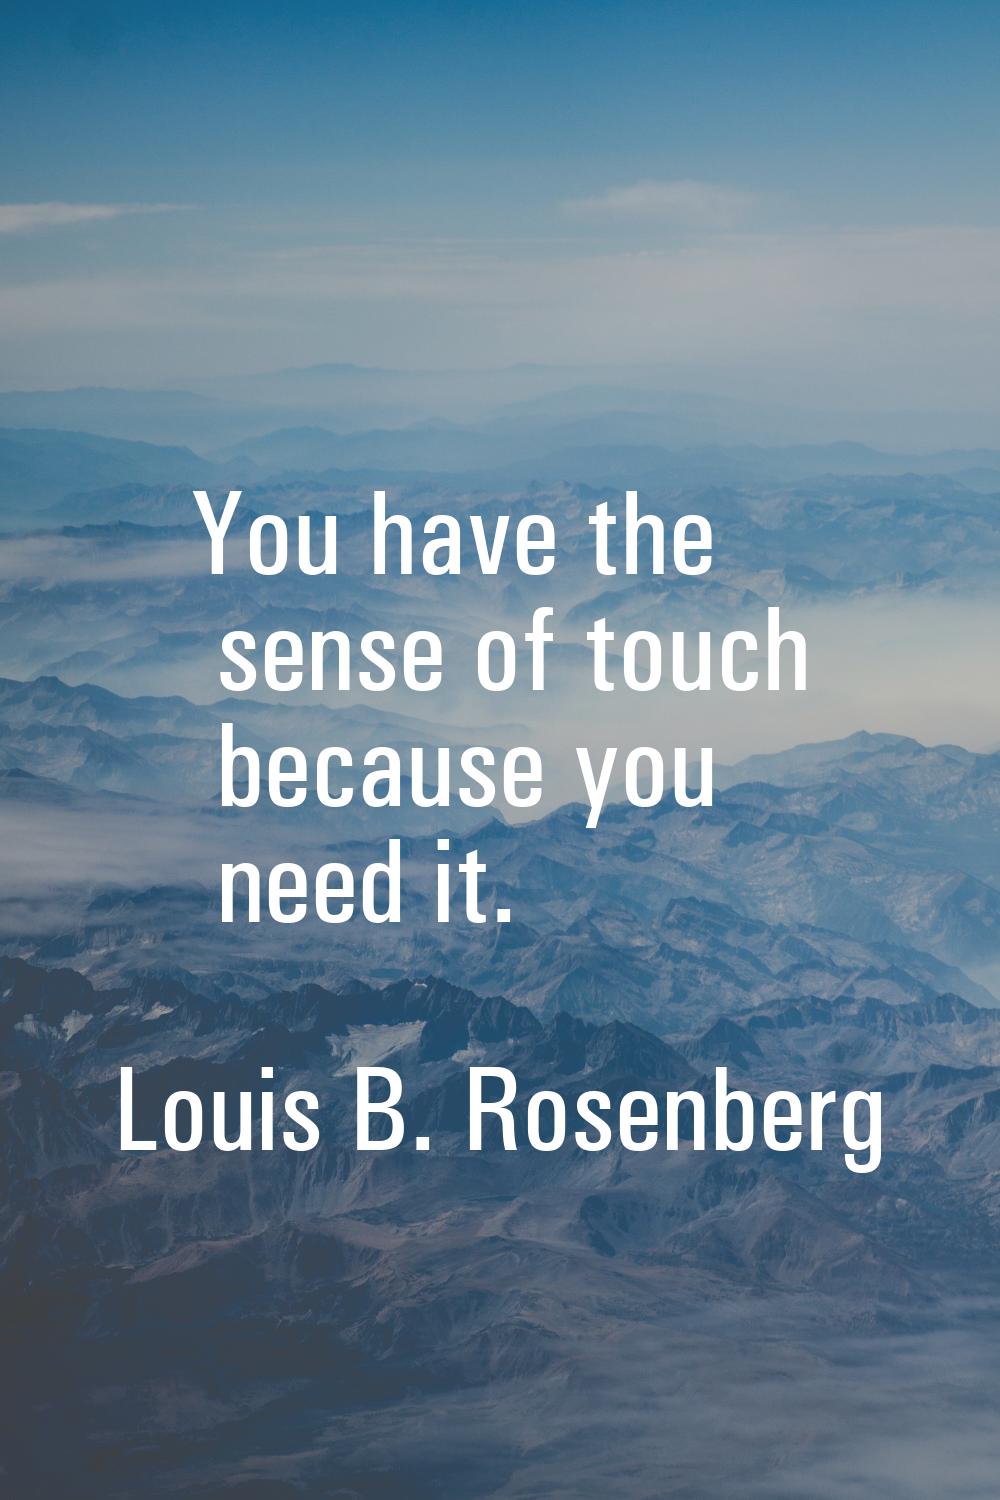 You have the sense of touch because you need it.